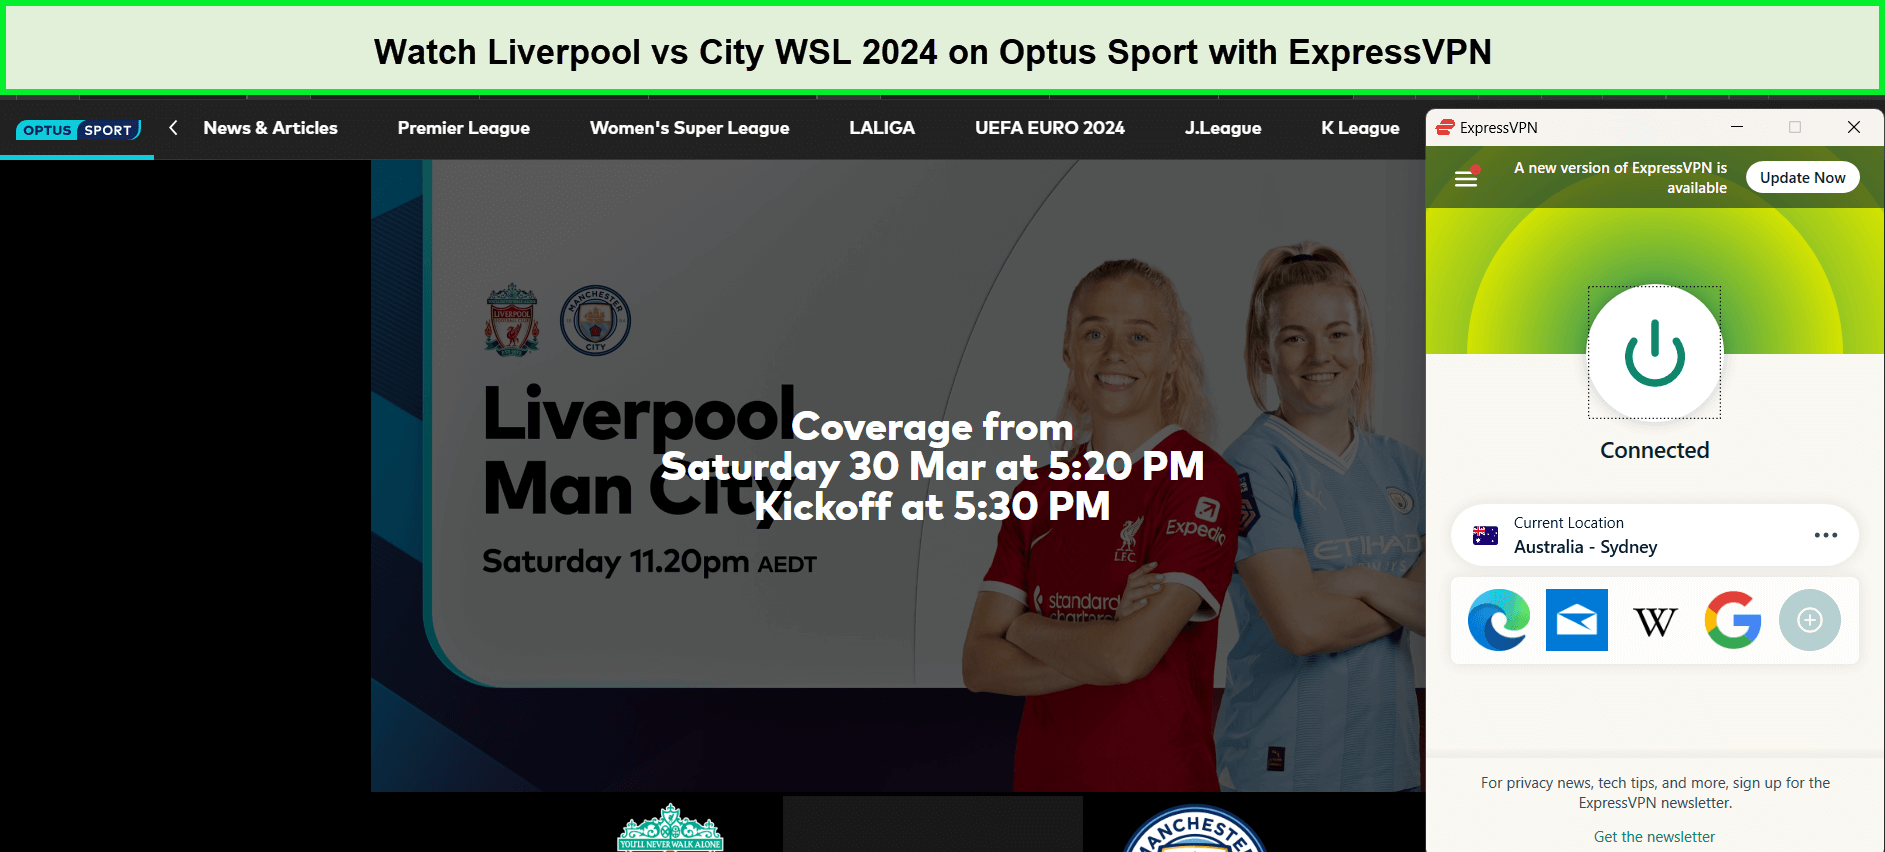 watch-Liverpool-vs-City-WSL-2024-in-Singapore-on-Optus-Sport-with-expressvpn